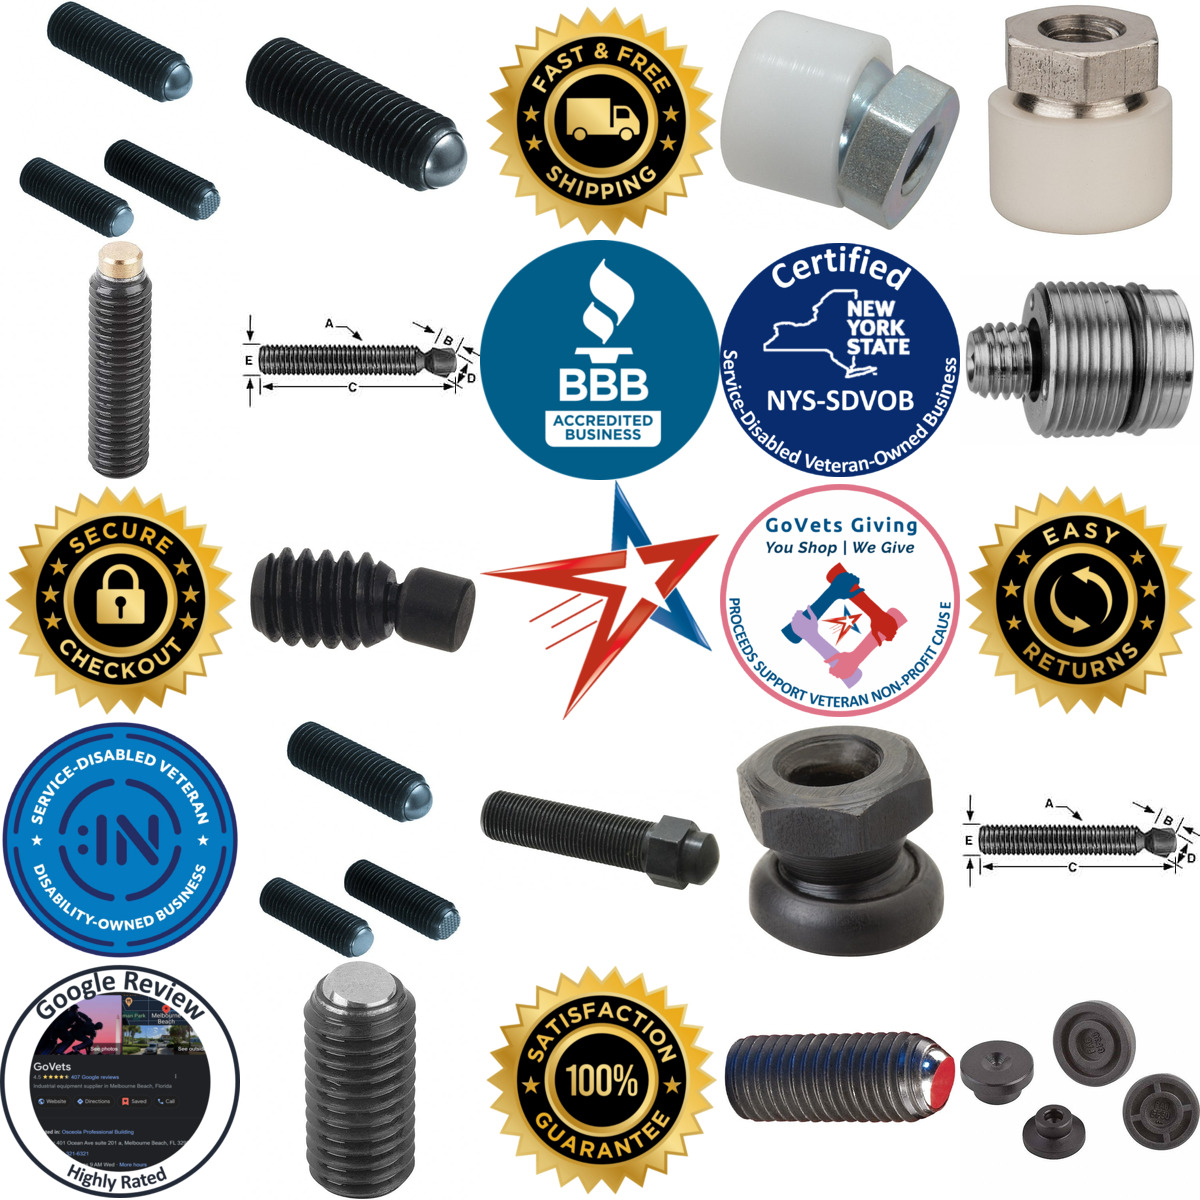 A selection of Clamping and Positioning Screws products on GoVets